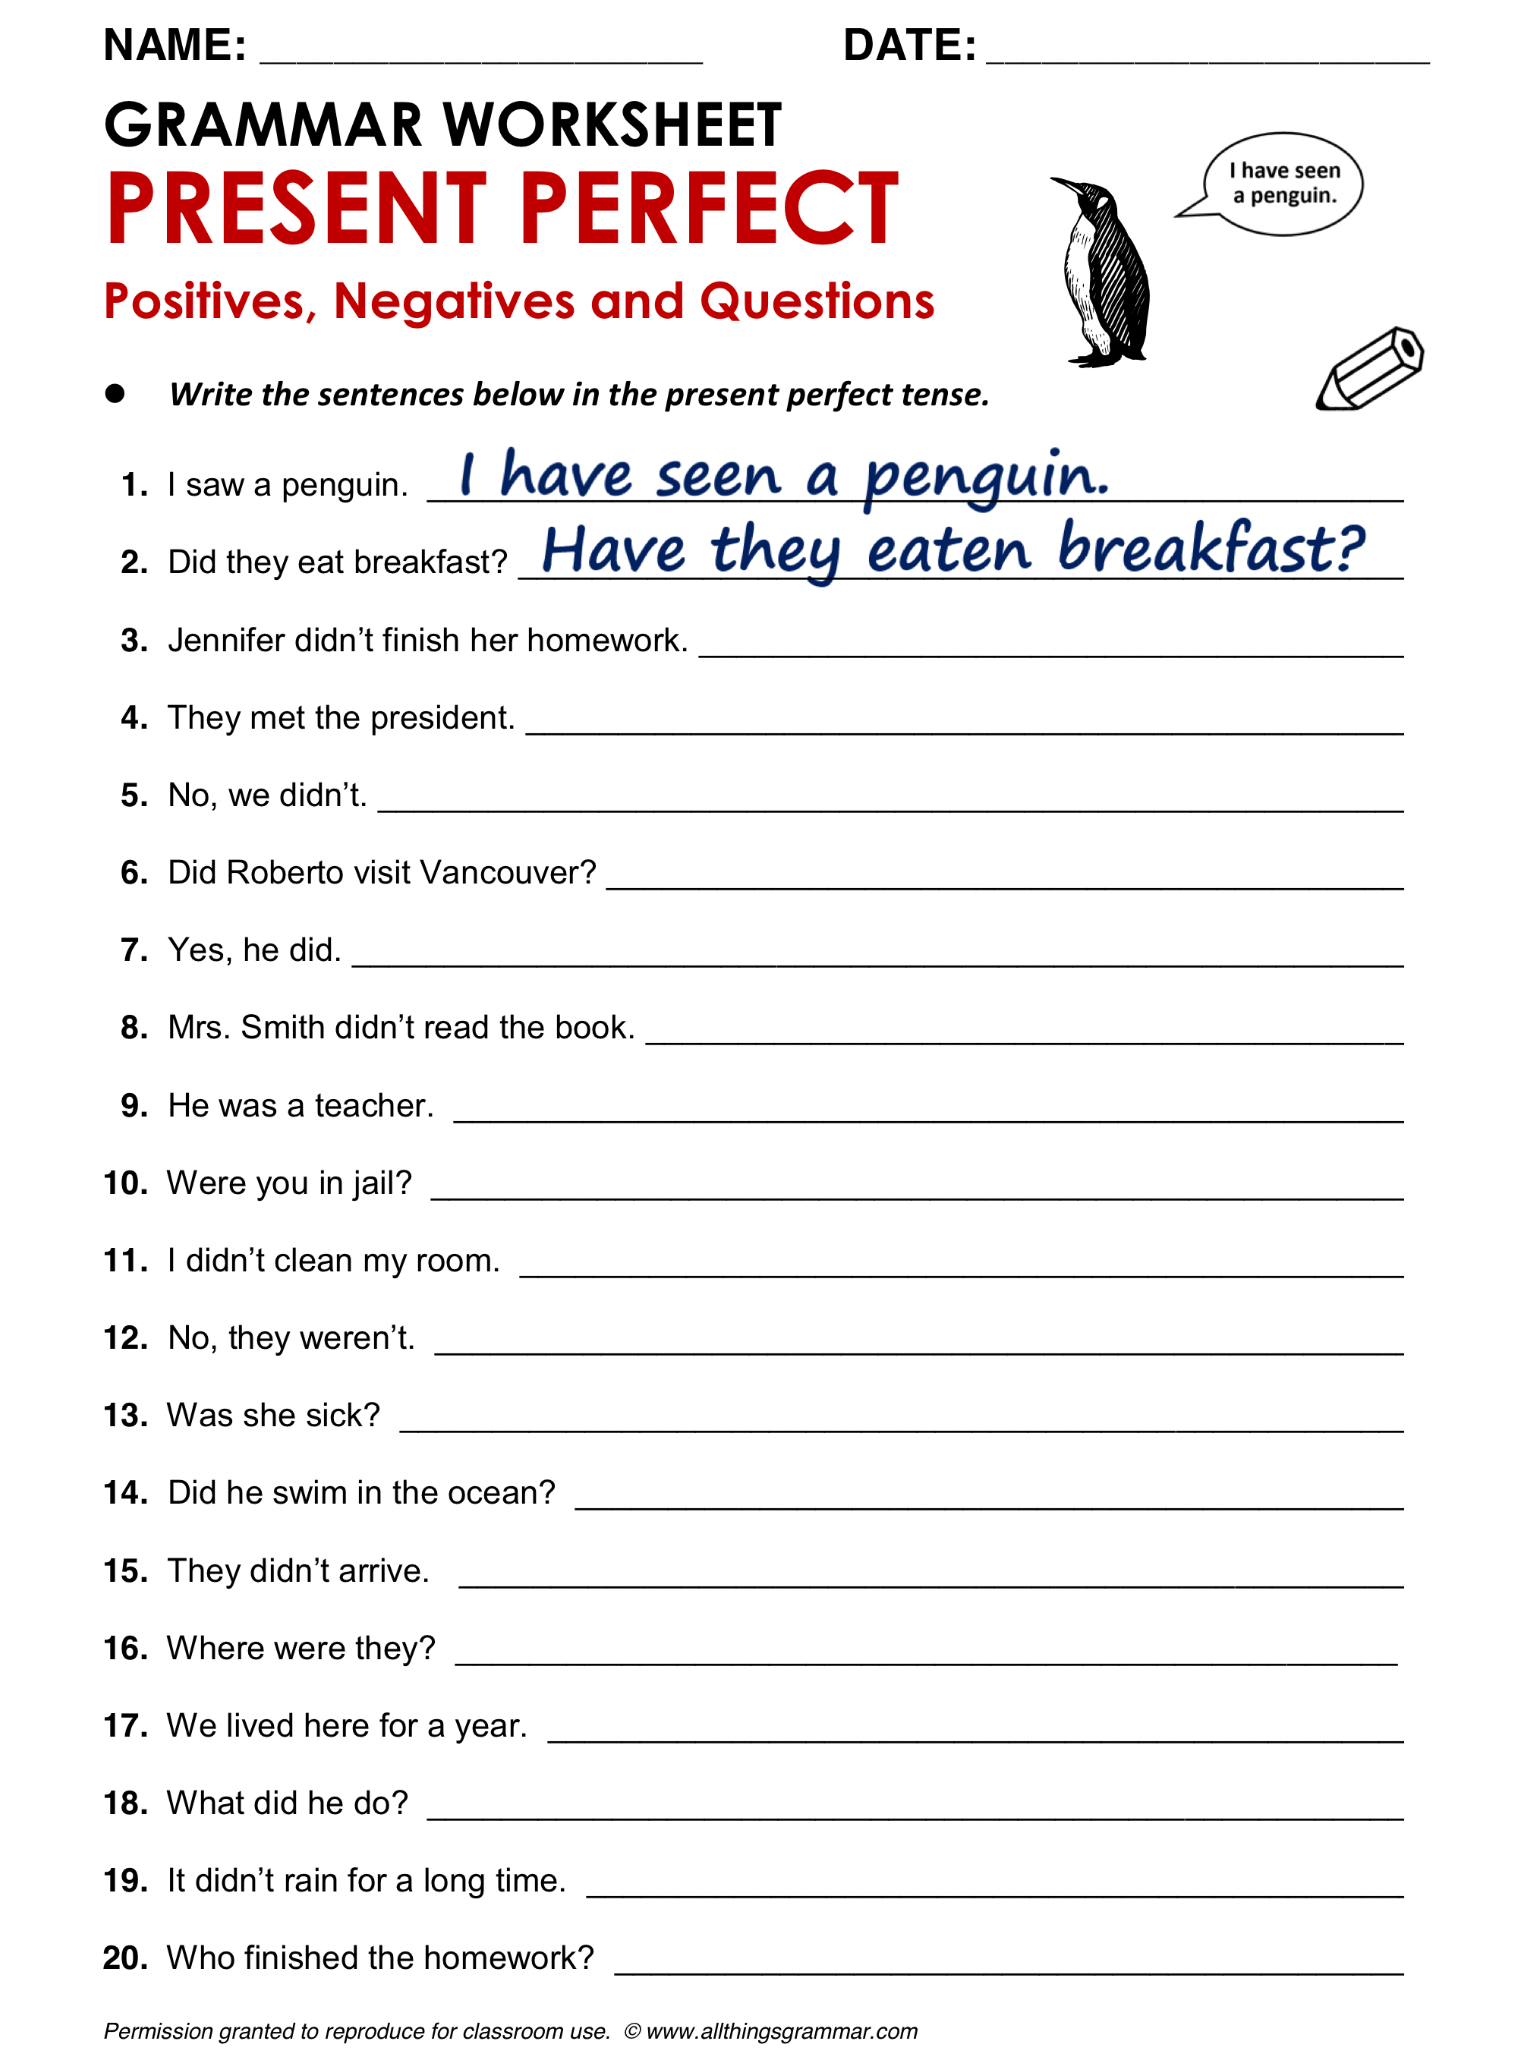 Present Perfect Tense Worksheets For Esl